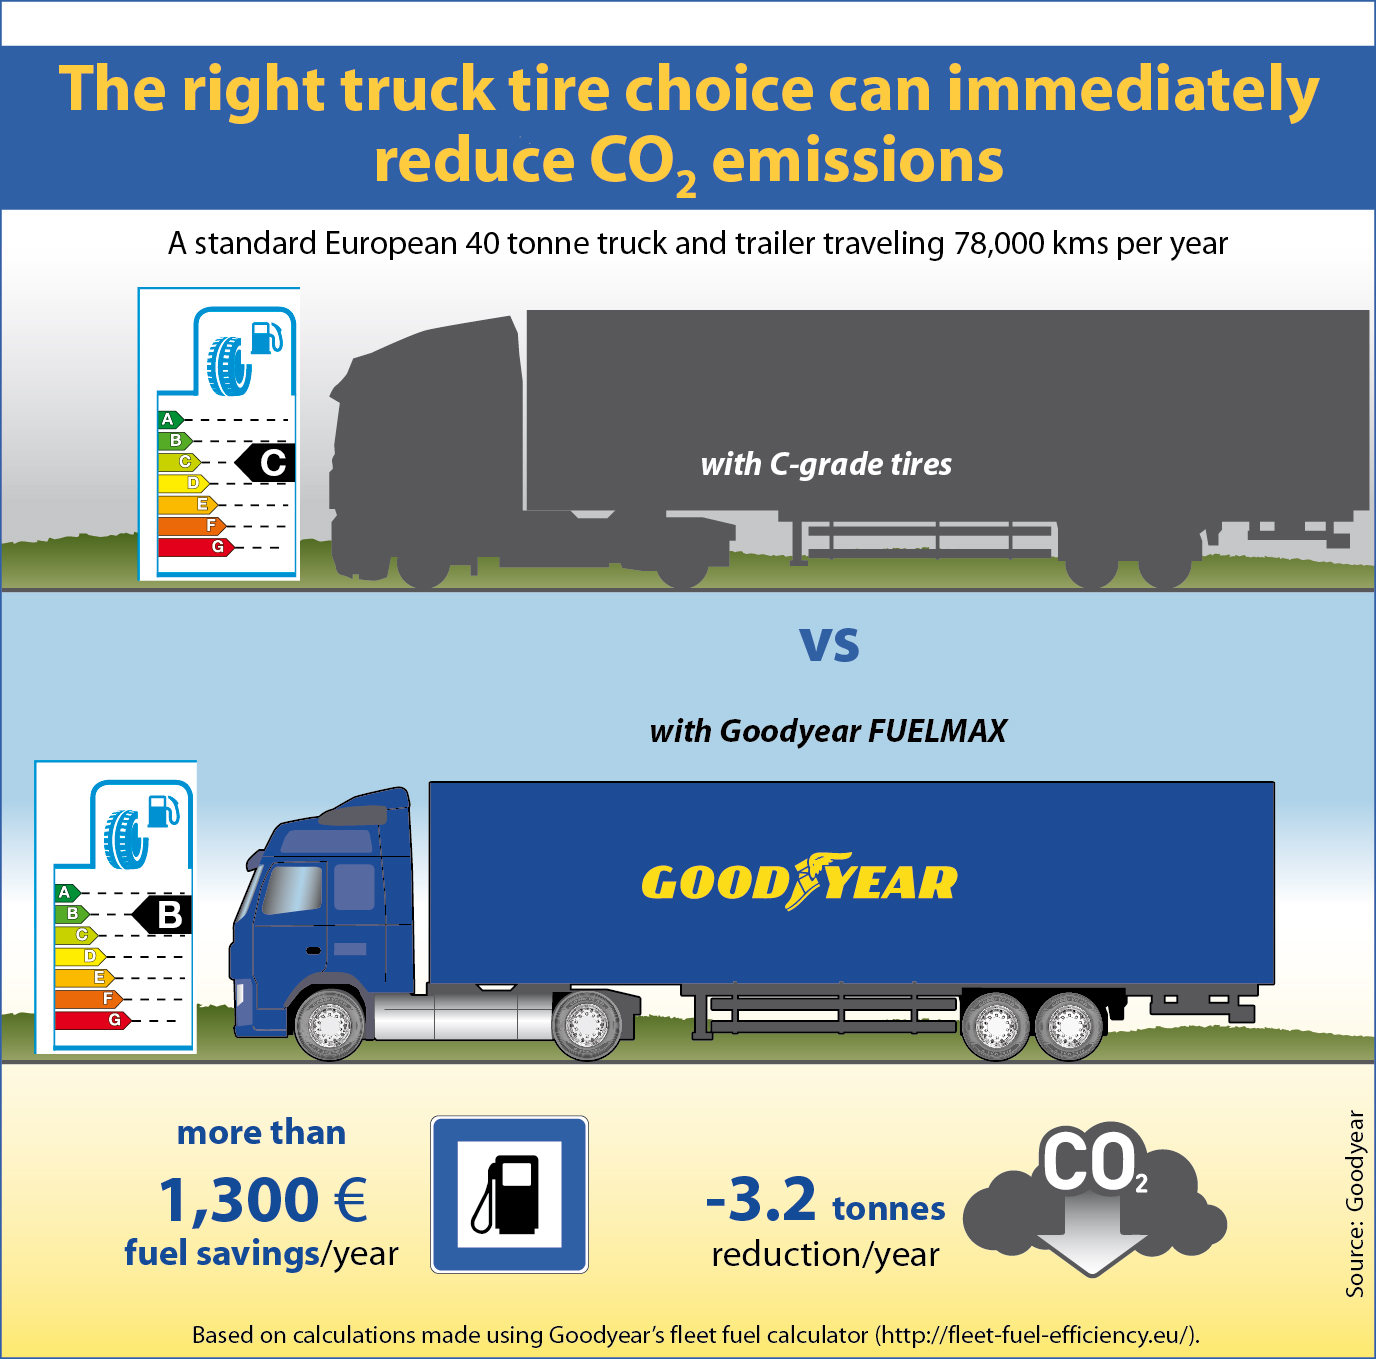 Goodyear highlights effects of truck tyre choice on CO2 emissions